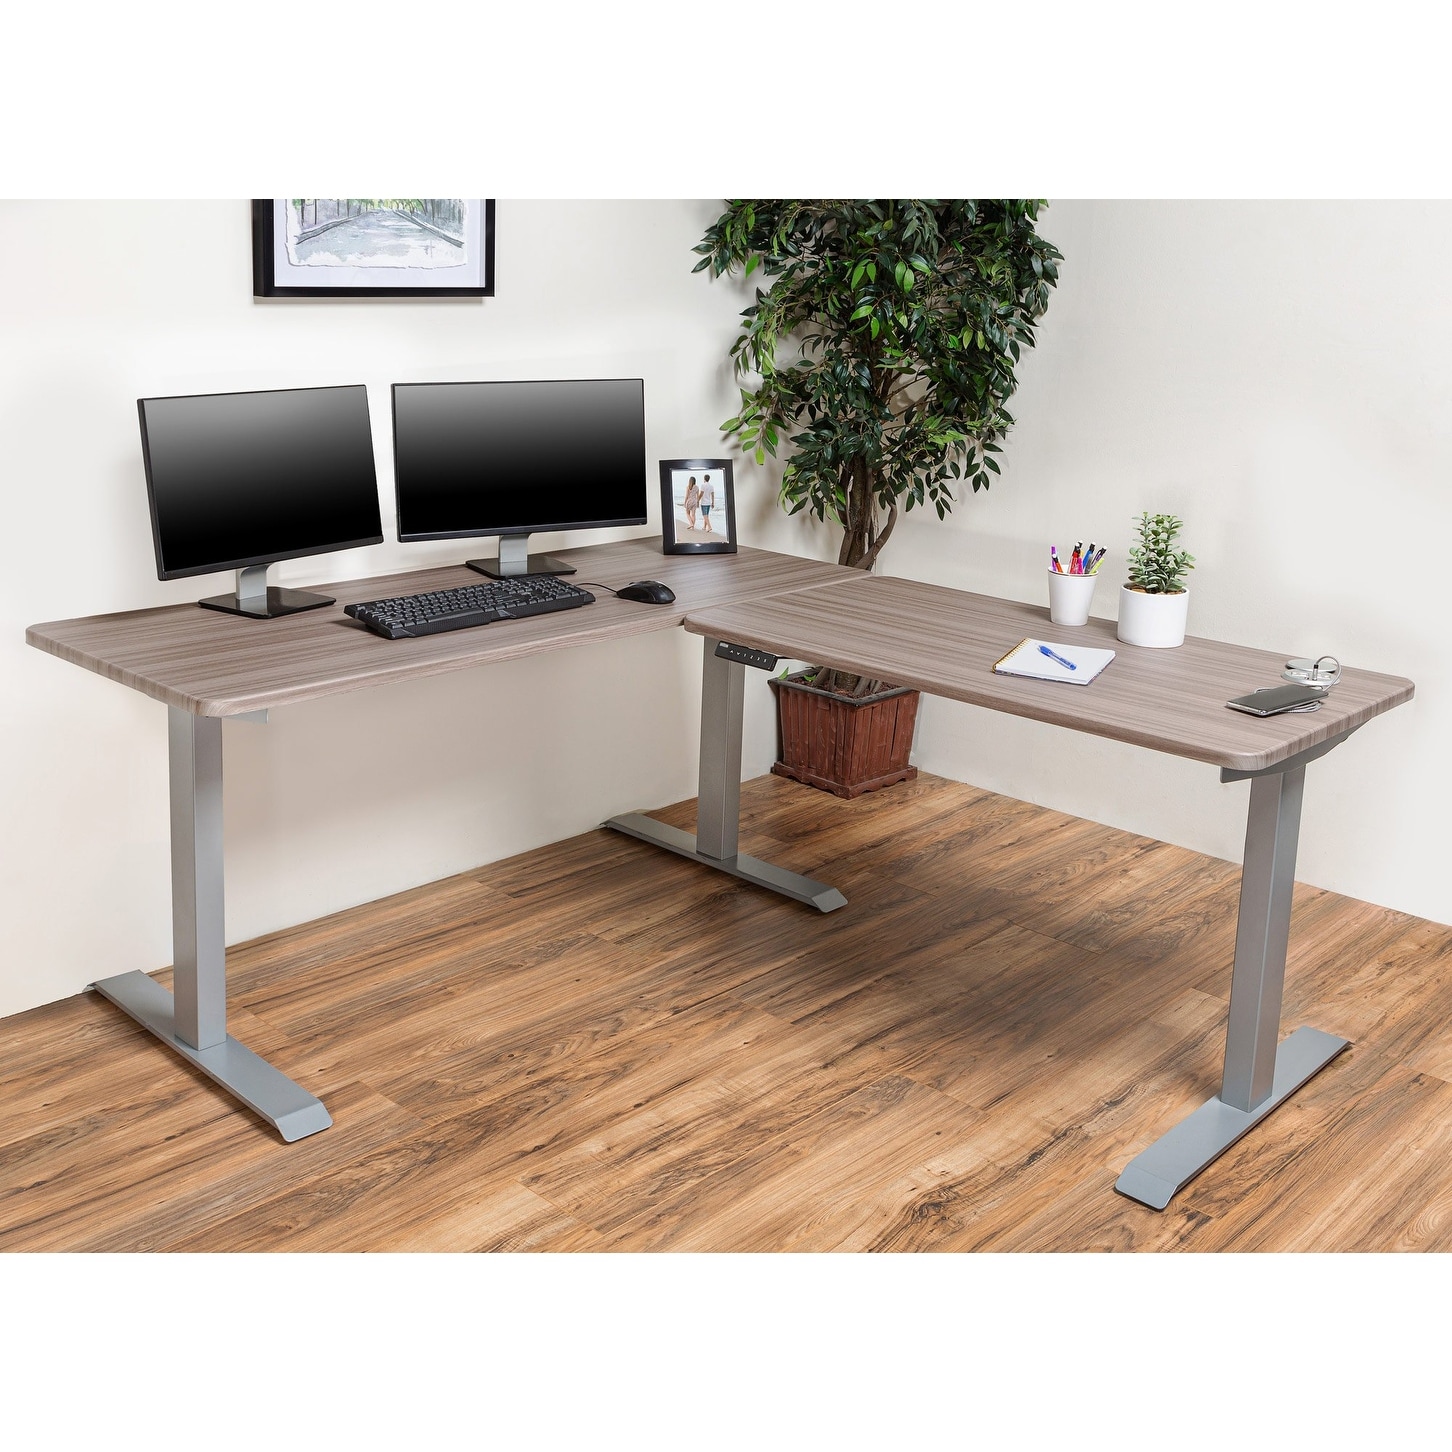 https://ak1.ostkcdn.com/images/products/is/images/direct/c2cd2d762a5196b43c95764946f59b5268d1f465/BRODAN-Electric-Standing-Desk-with-Grommet%2C-Adjustable-Height-Sit-Stand-Home-Office-Desk%2C-L-Shaped-Computer-Desk%2C-67x59-inches.jpg